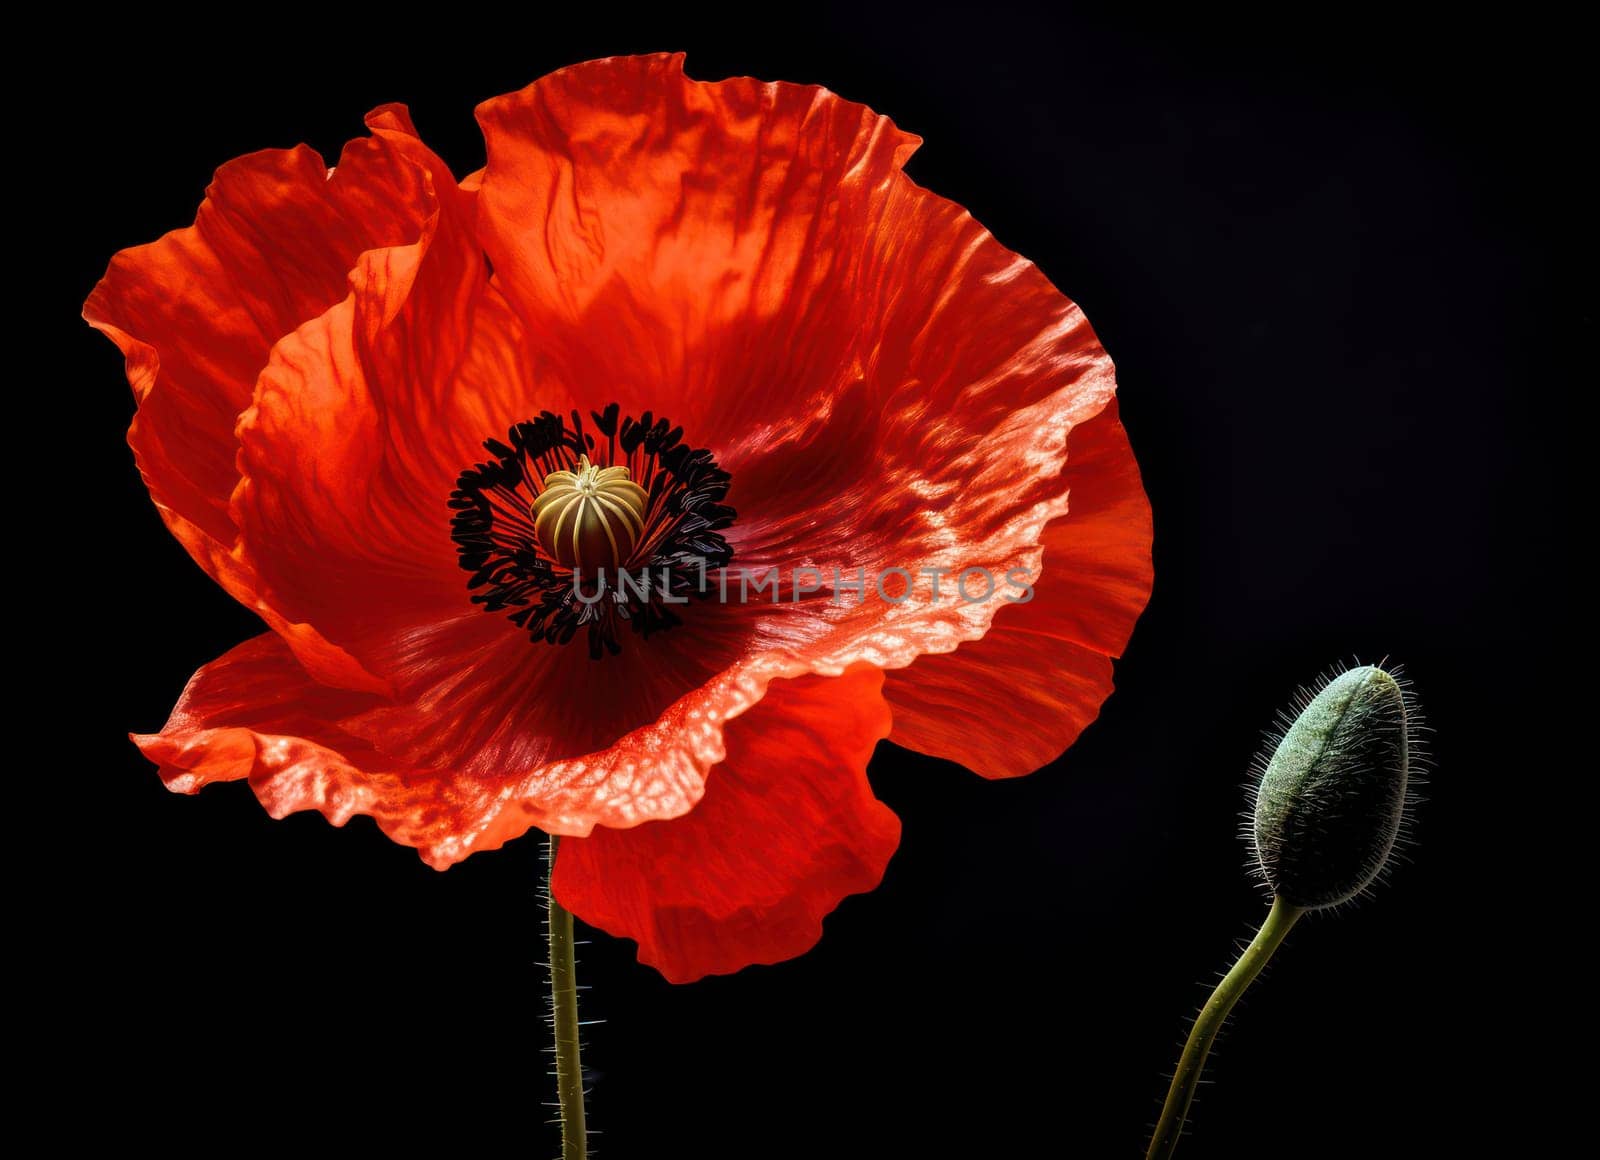 Scarlet Beauty: Vibrant Red Poppy Blossom in a Delicate Field of Wildflowers by Vichizh